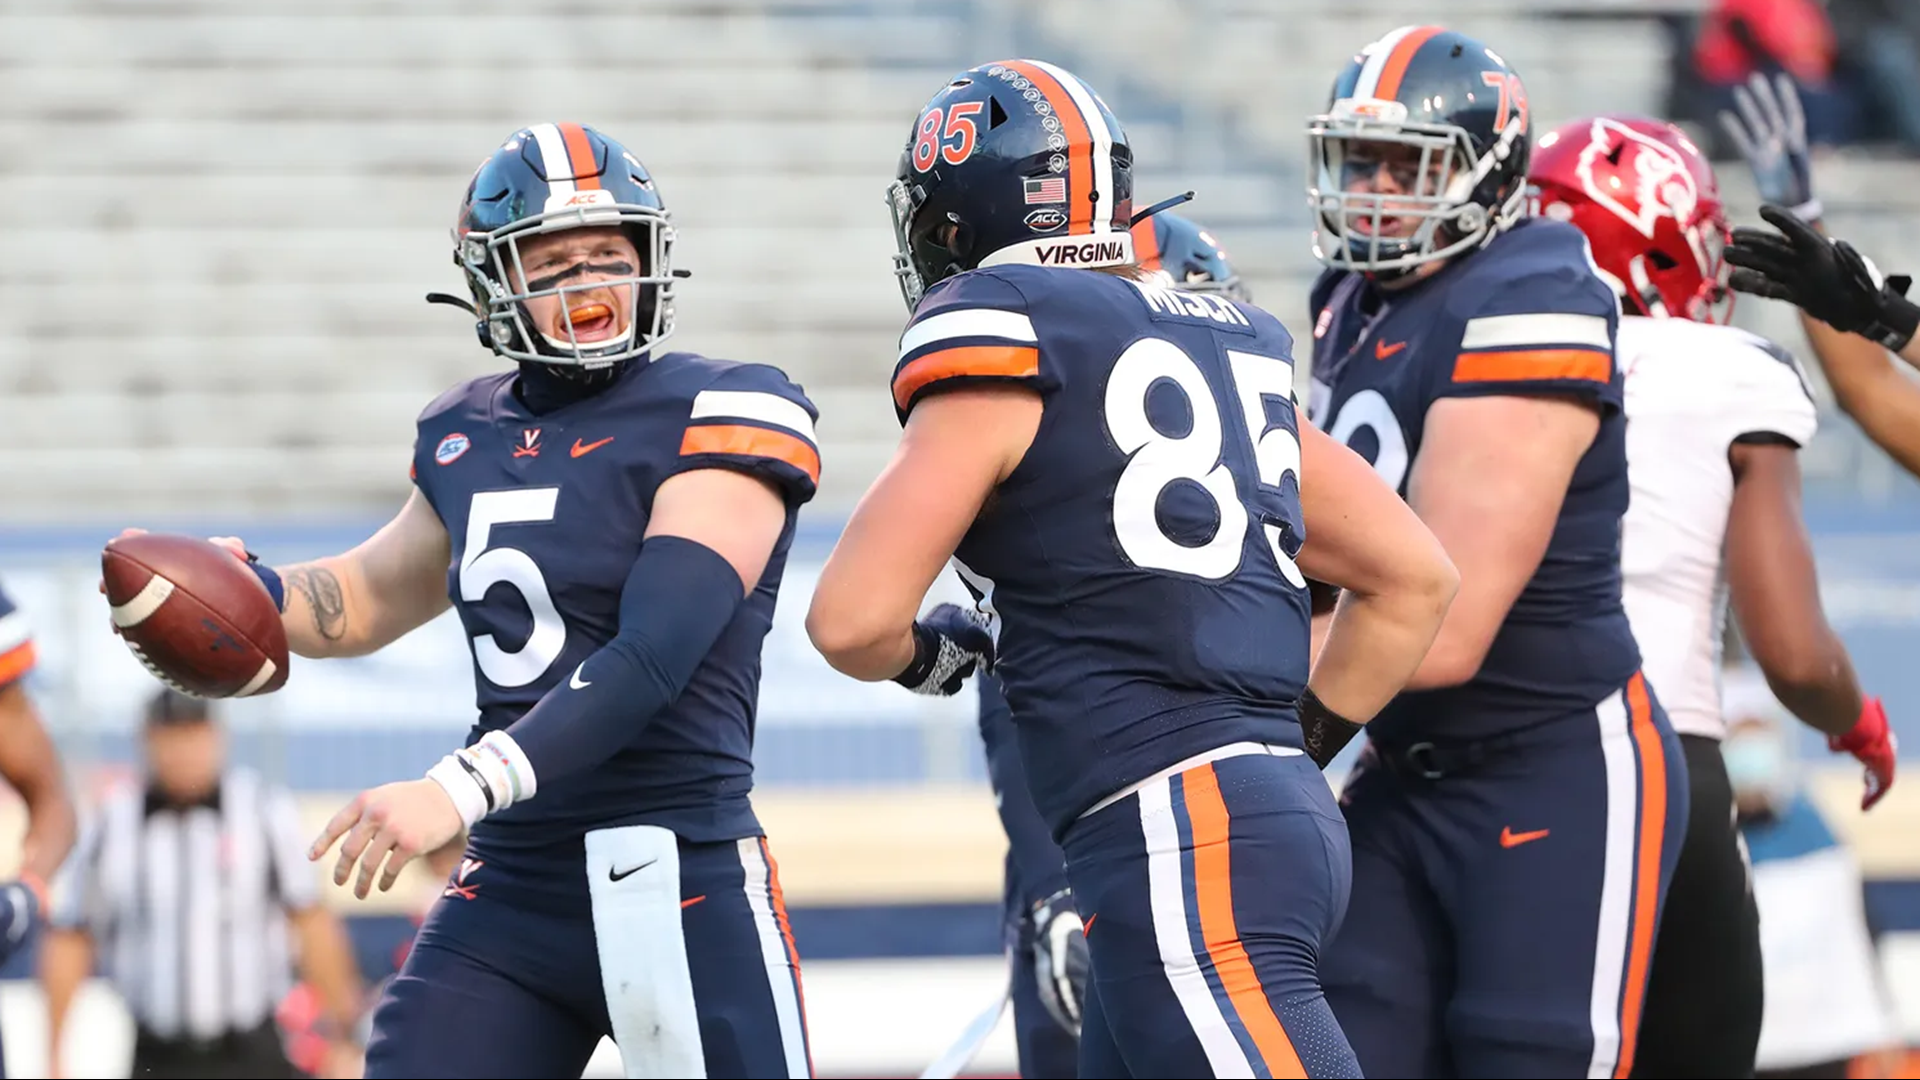 Wake Forest Demon Deacons vs. Virginia Cavaliers 9-24-2021- Free Pick & CFB Betting Prediction